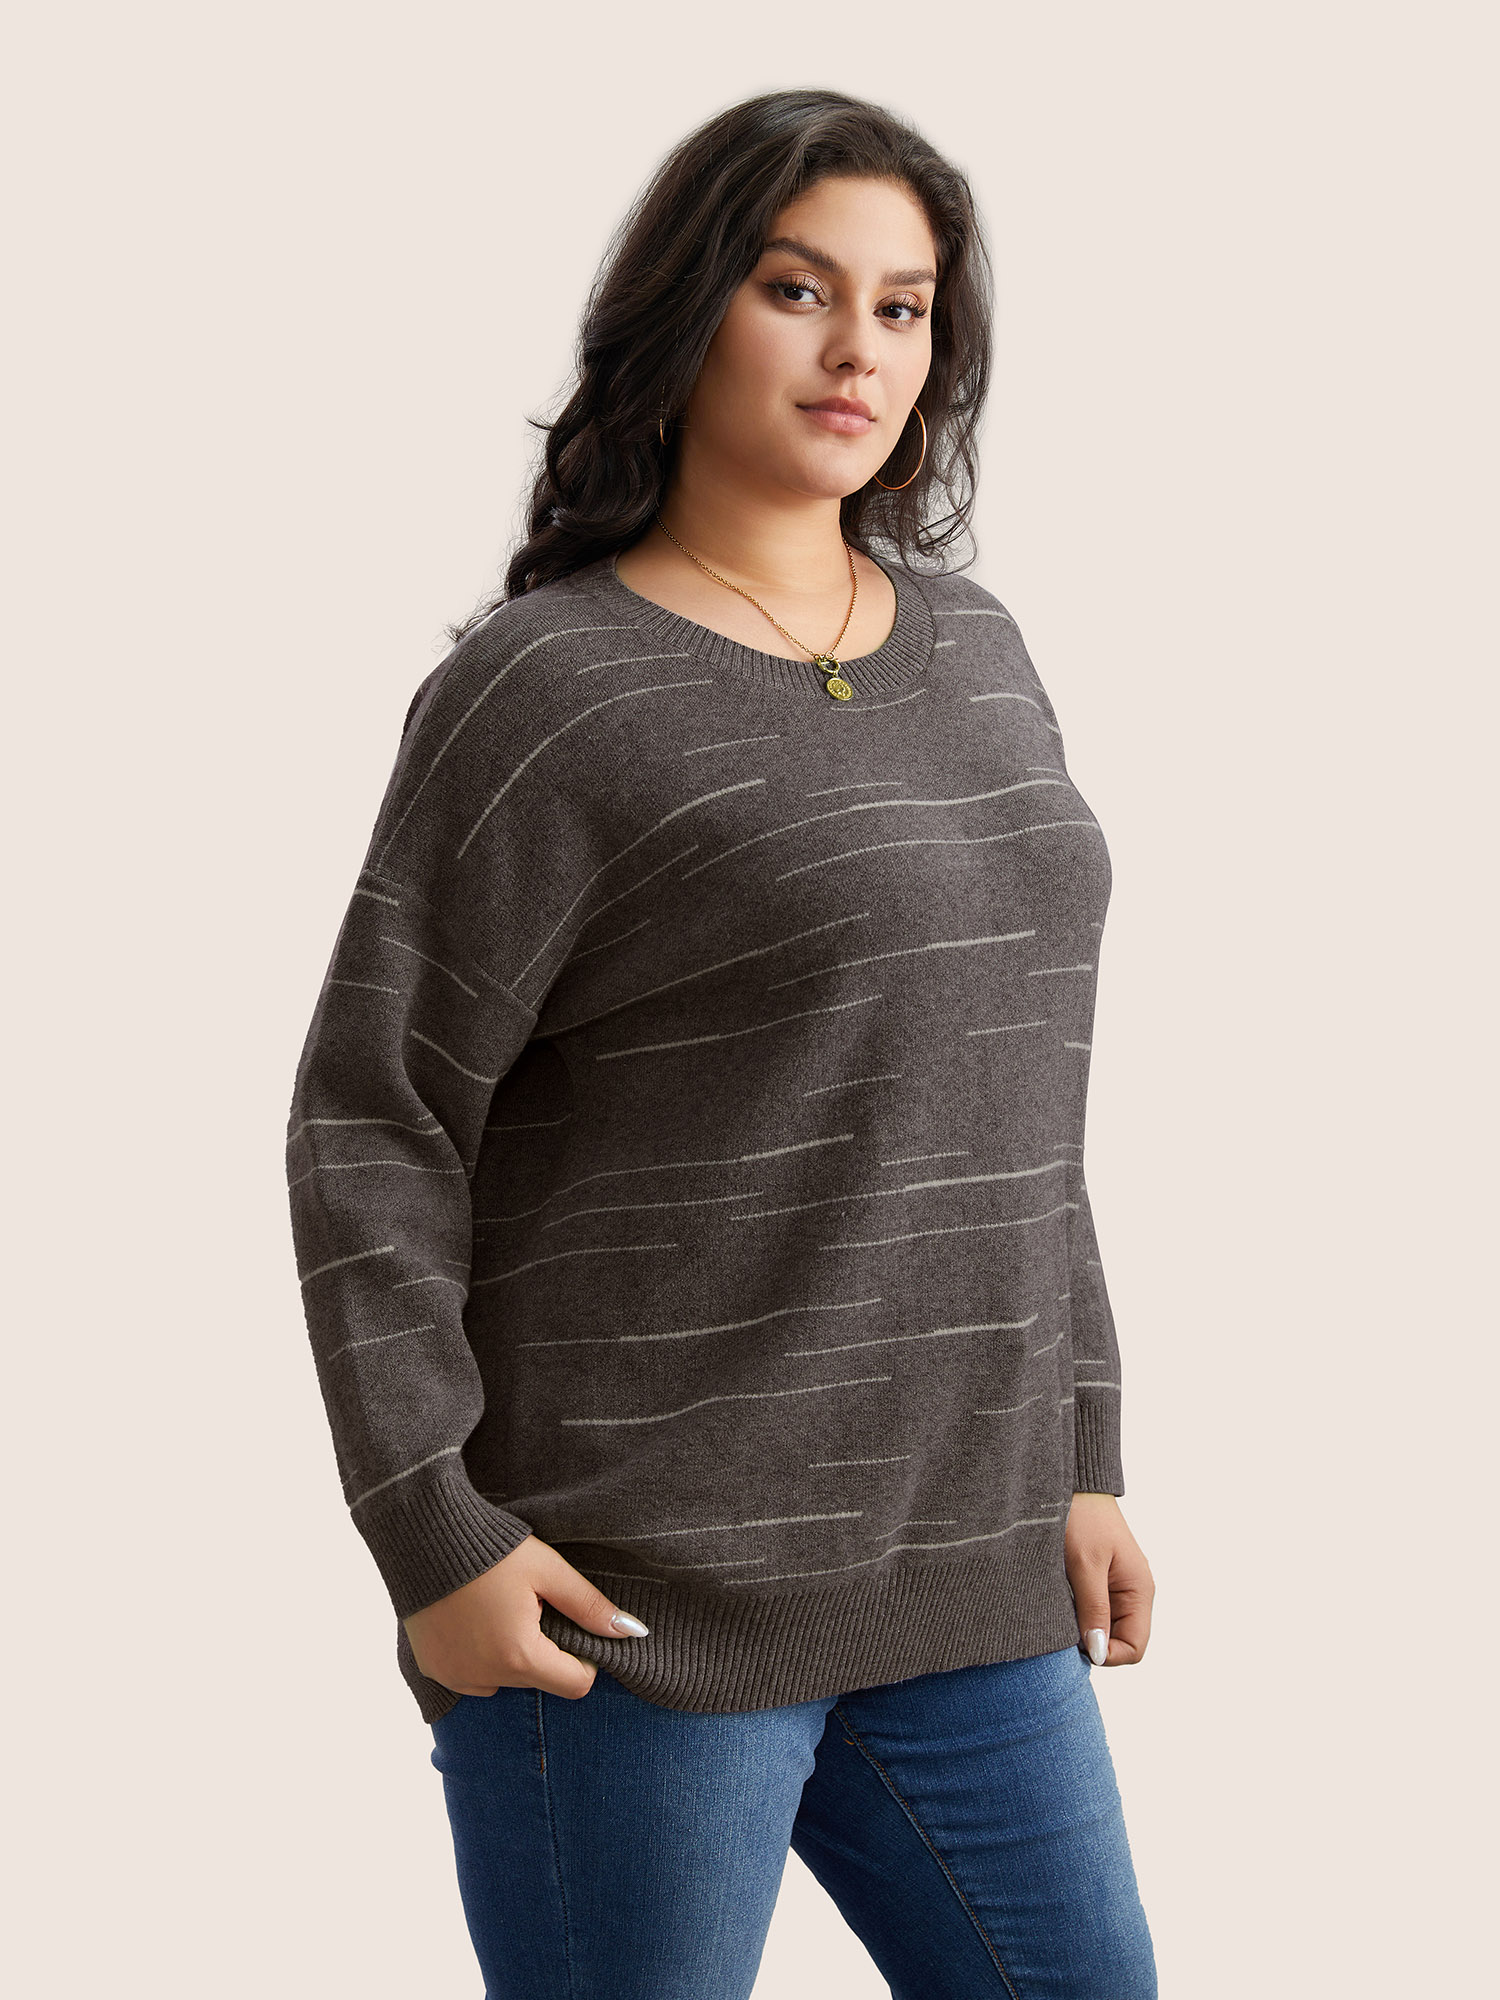 

Plus Size Supersoft Essentials Asymmetrical Striped Round Neck Pullover DarkBrown Women Casual Long Sleeve Round Neck Everyday Pullovers BloomChic